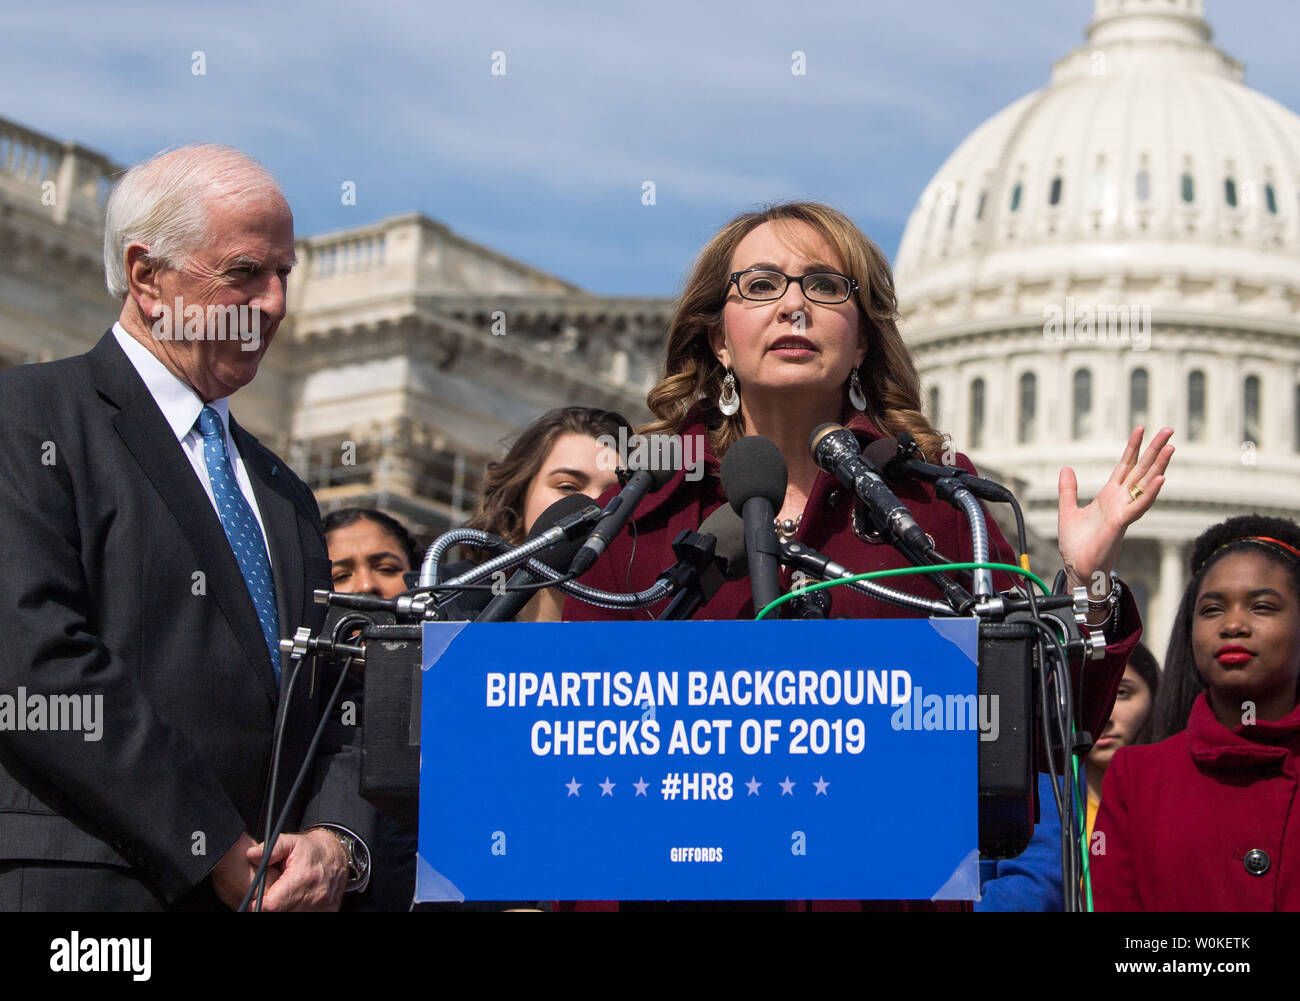 Former Rep. Gabrielle Giffords, D-Ariz., speaks alongside Rep. Mike Thompson, D-Calif., at a news conference on H.R.8, the Bipartisan Background Checks Act of 2019, on Capitol Hill in Washington, D.C. on February 26, 2019. The bill mandates background checks for all firearm sales. Photo by Kevin Dietsch/UPI Stock Photo